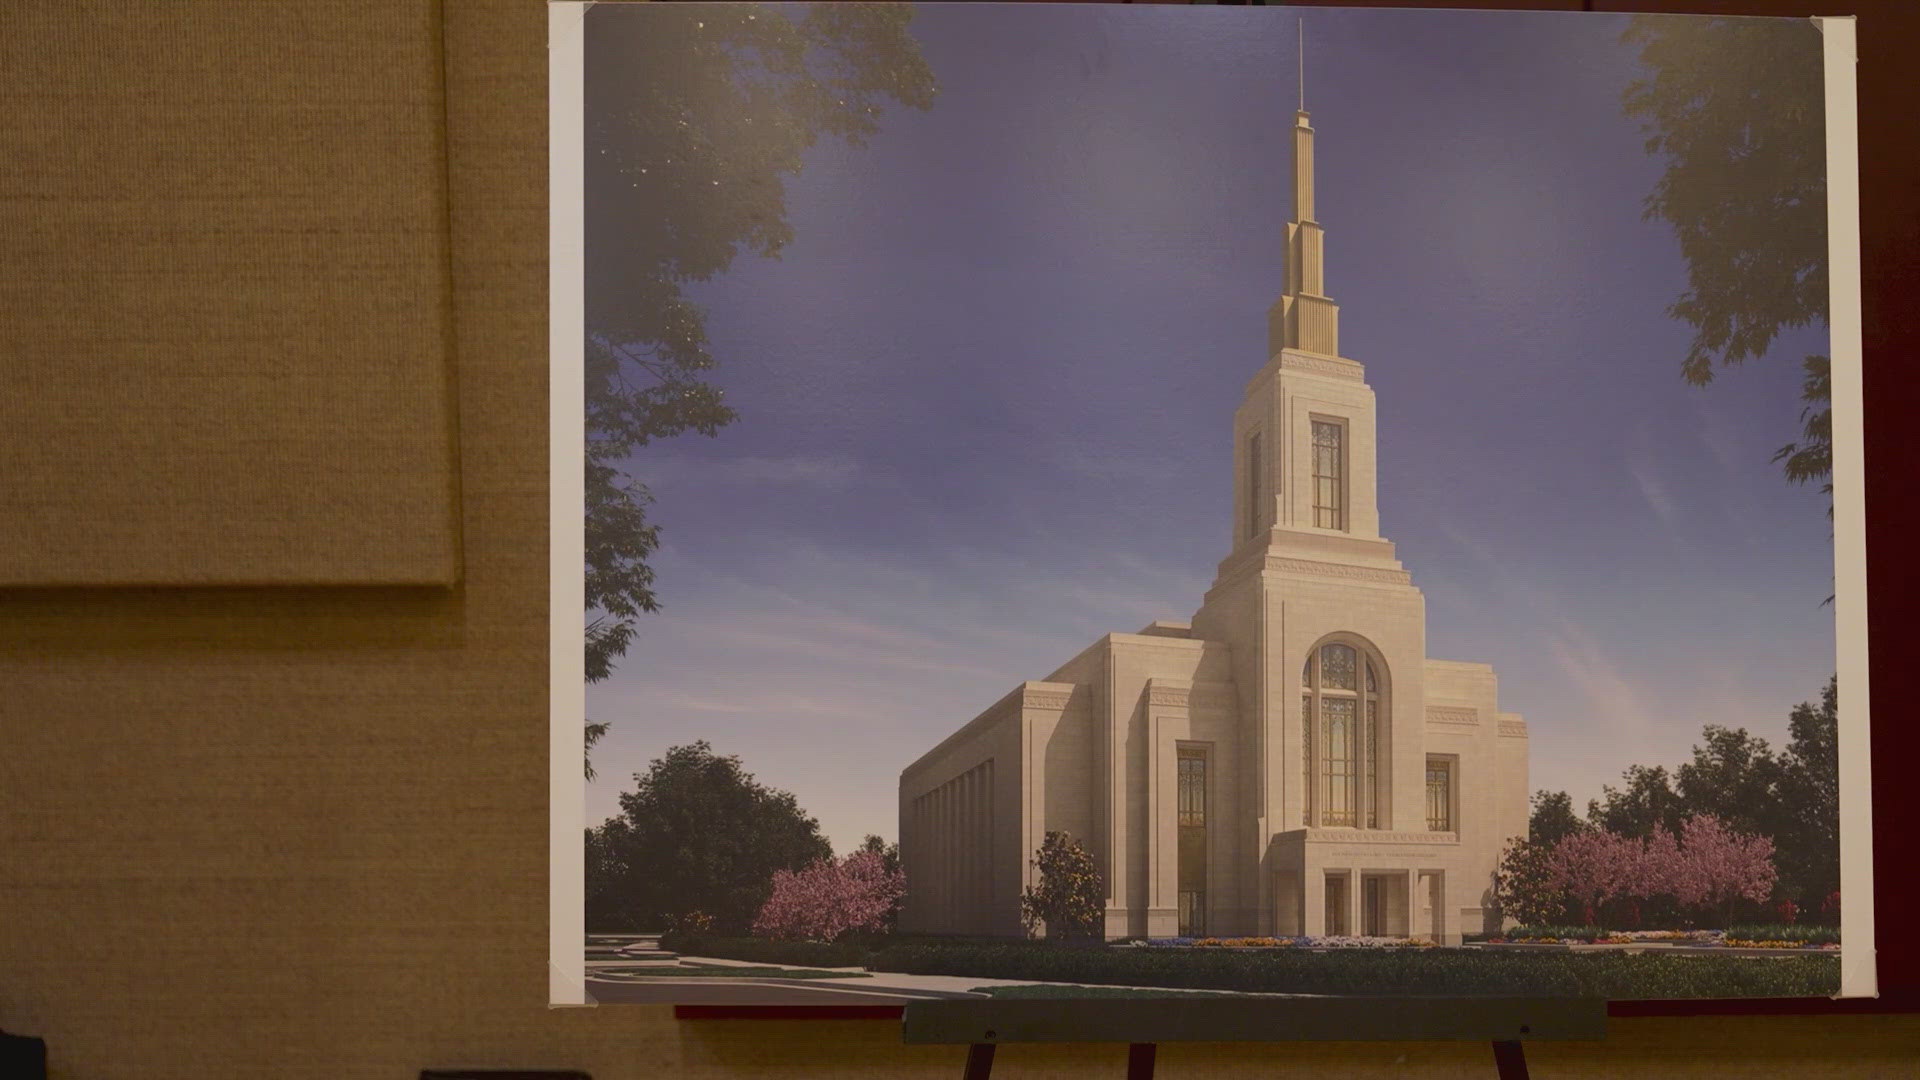 The Church of Latter-Day Saints is proposing a new church in Fairview, but residents want the design scaled back.